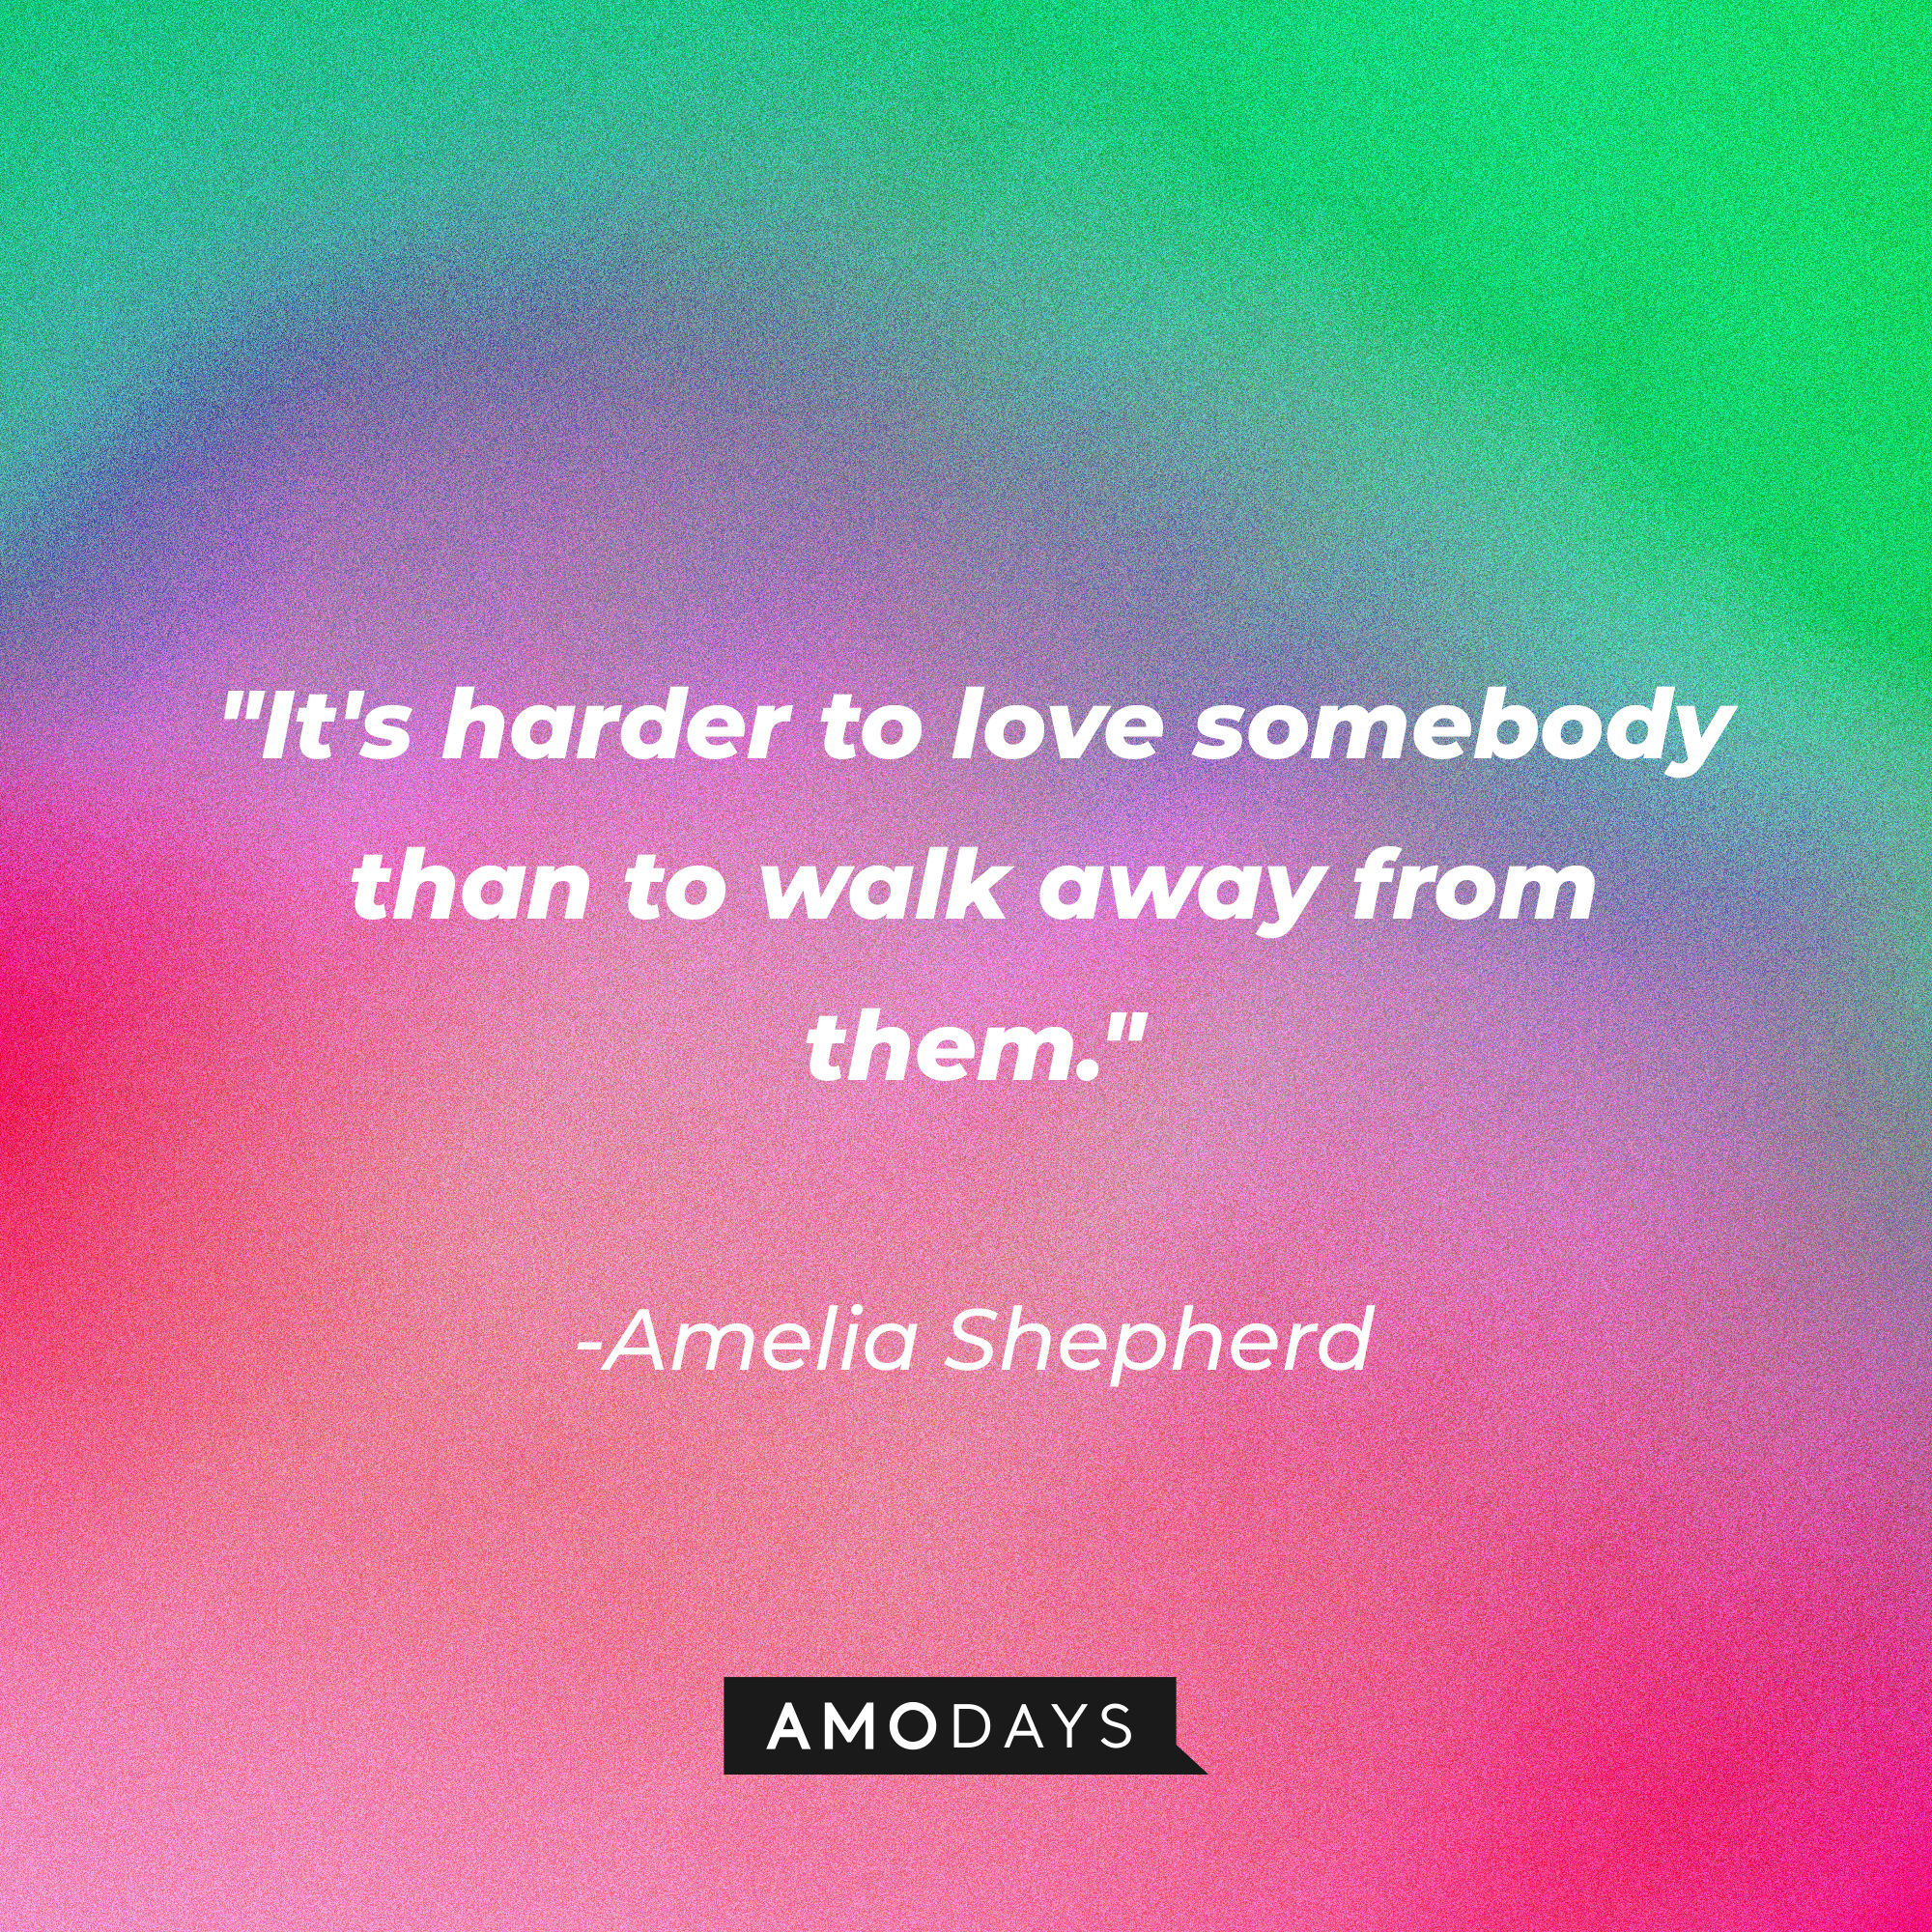 Amelia Shepherd's quote: "It's harder to love somebody than to walk away from them." | Source: AmoDays